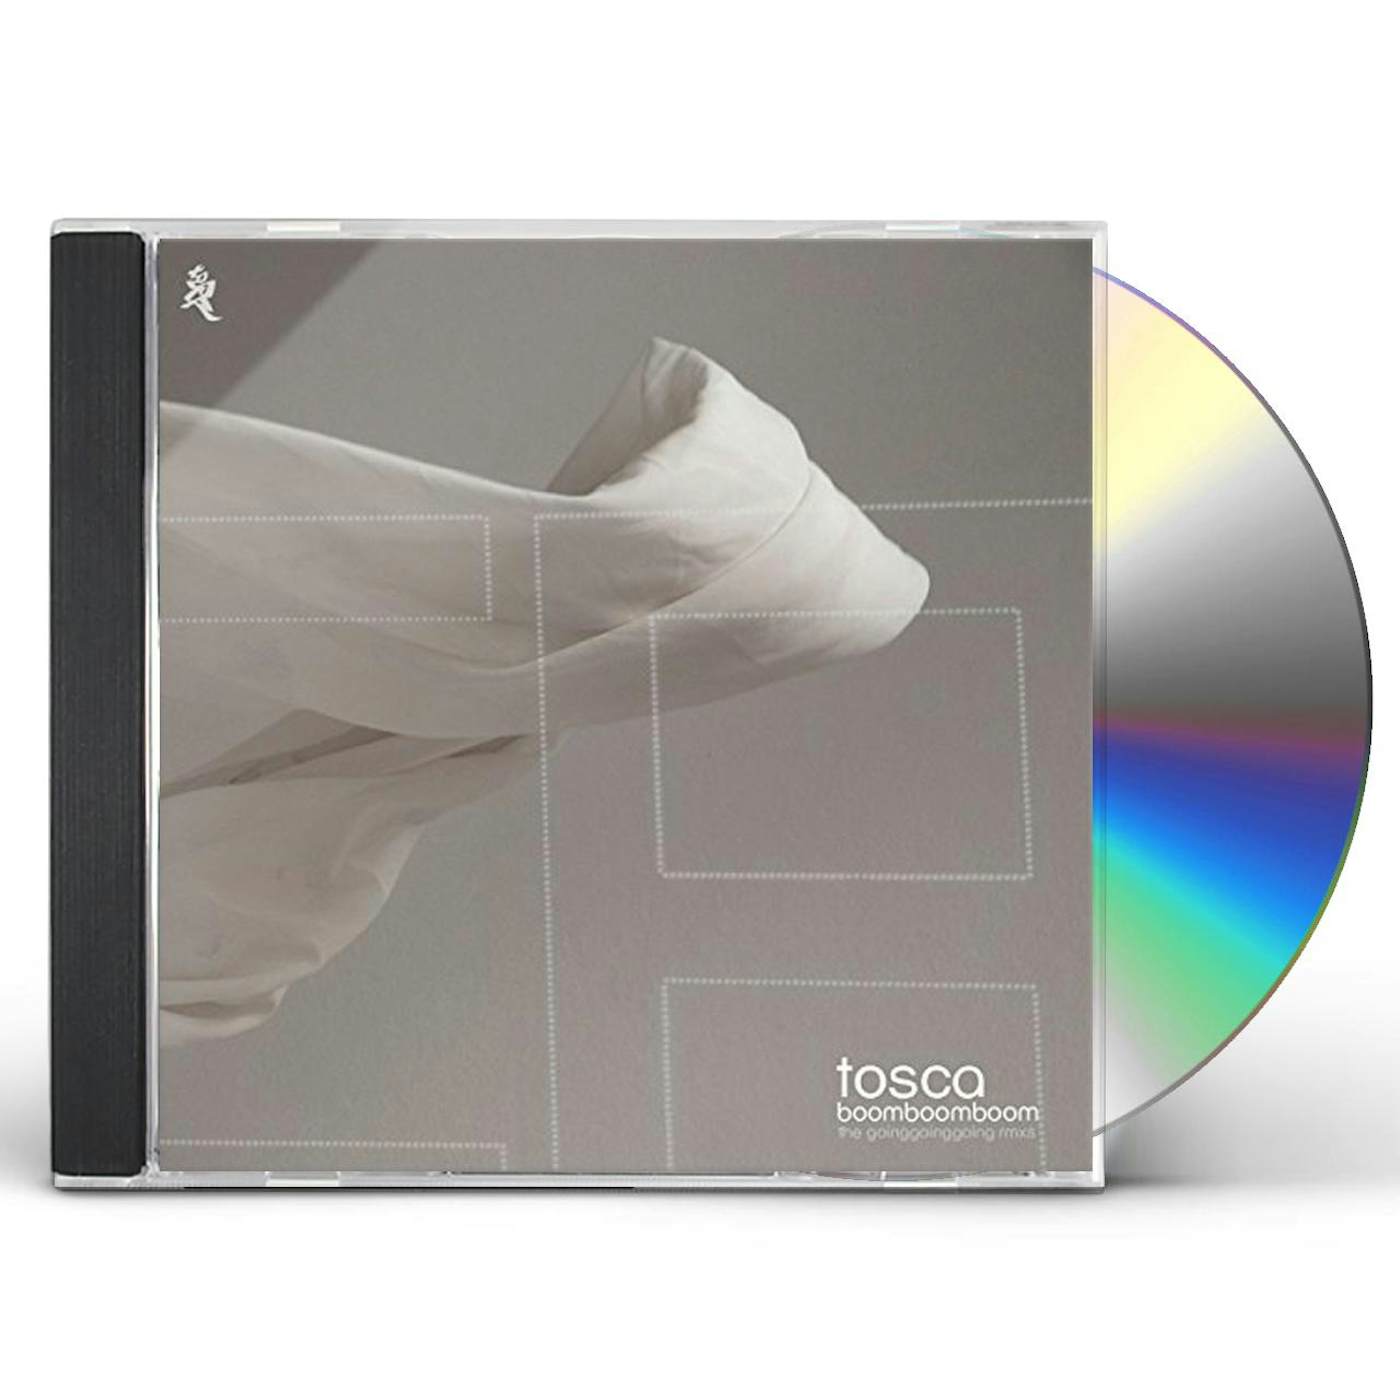 Tosca BOOM BOOM BOOM (THE GOING GOING GOING REMIXES) CD